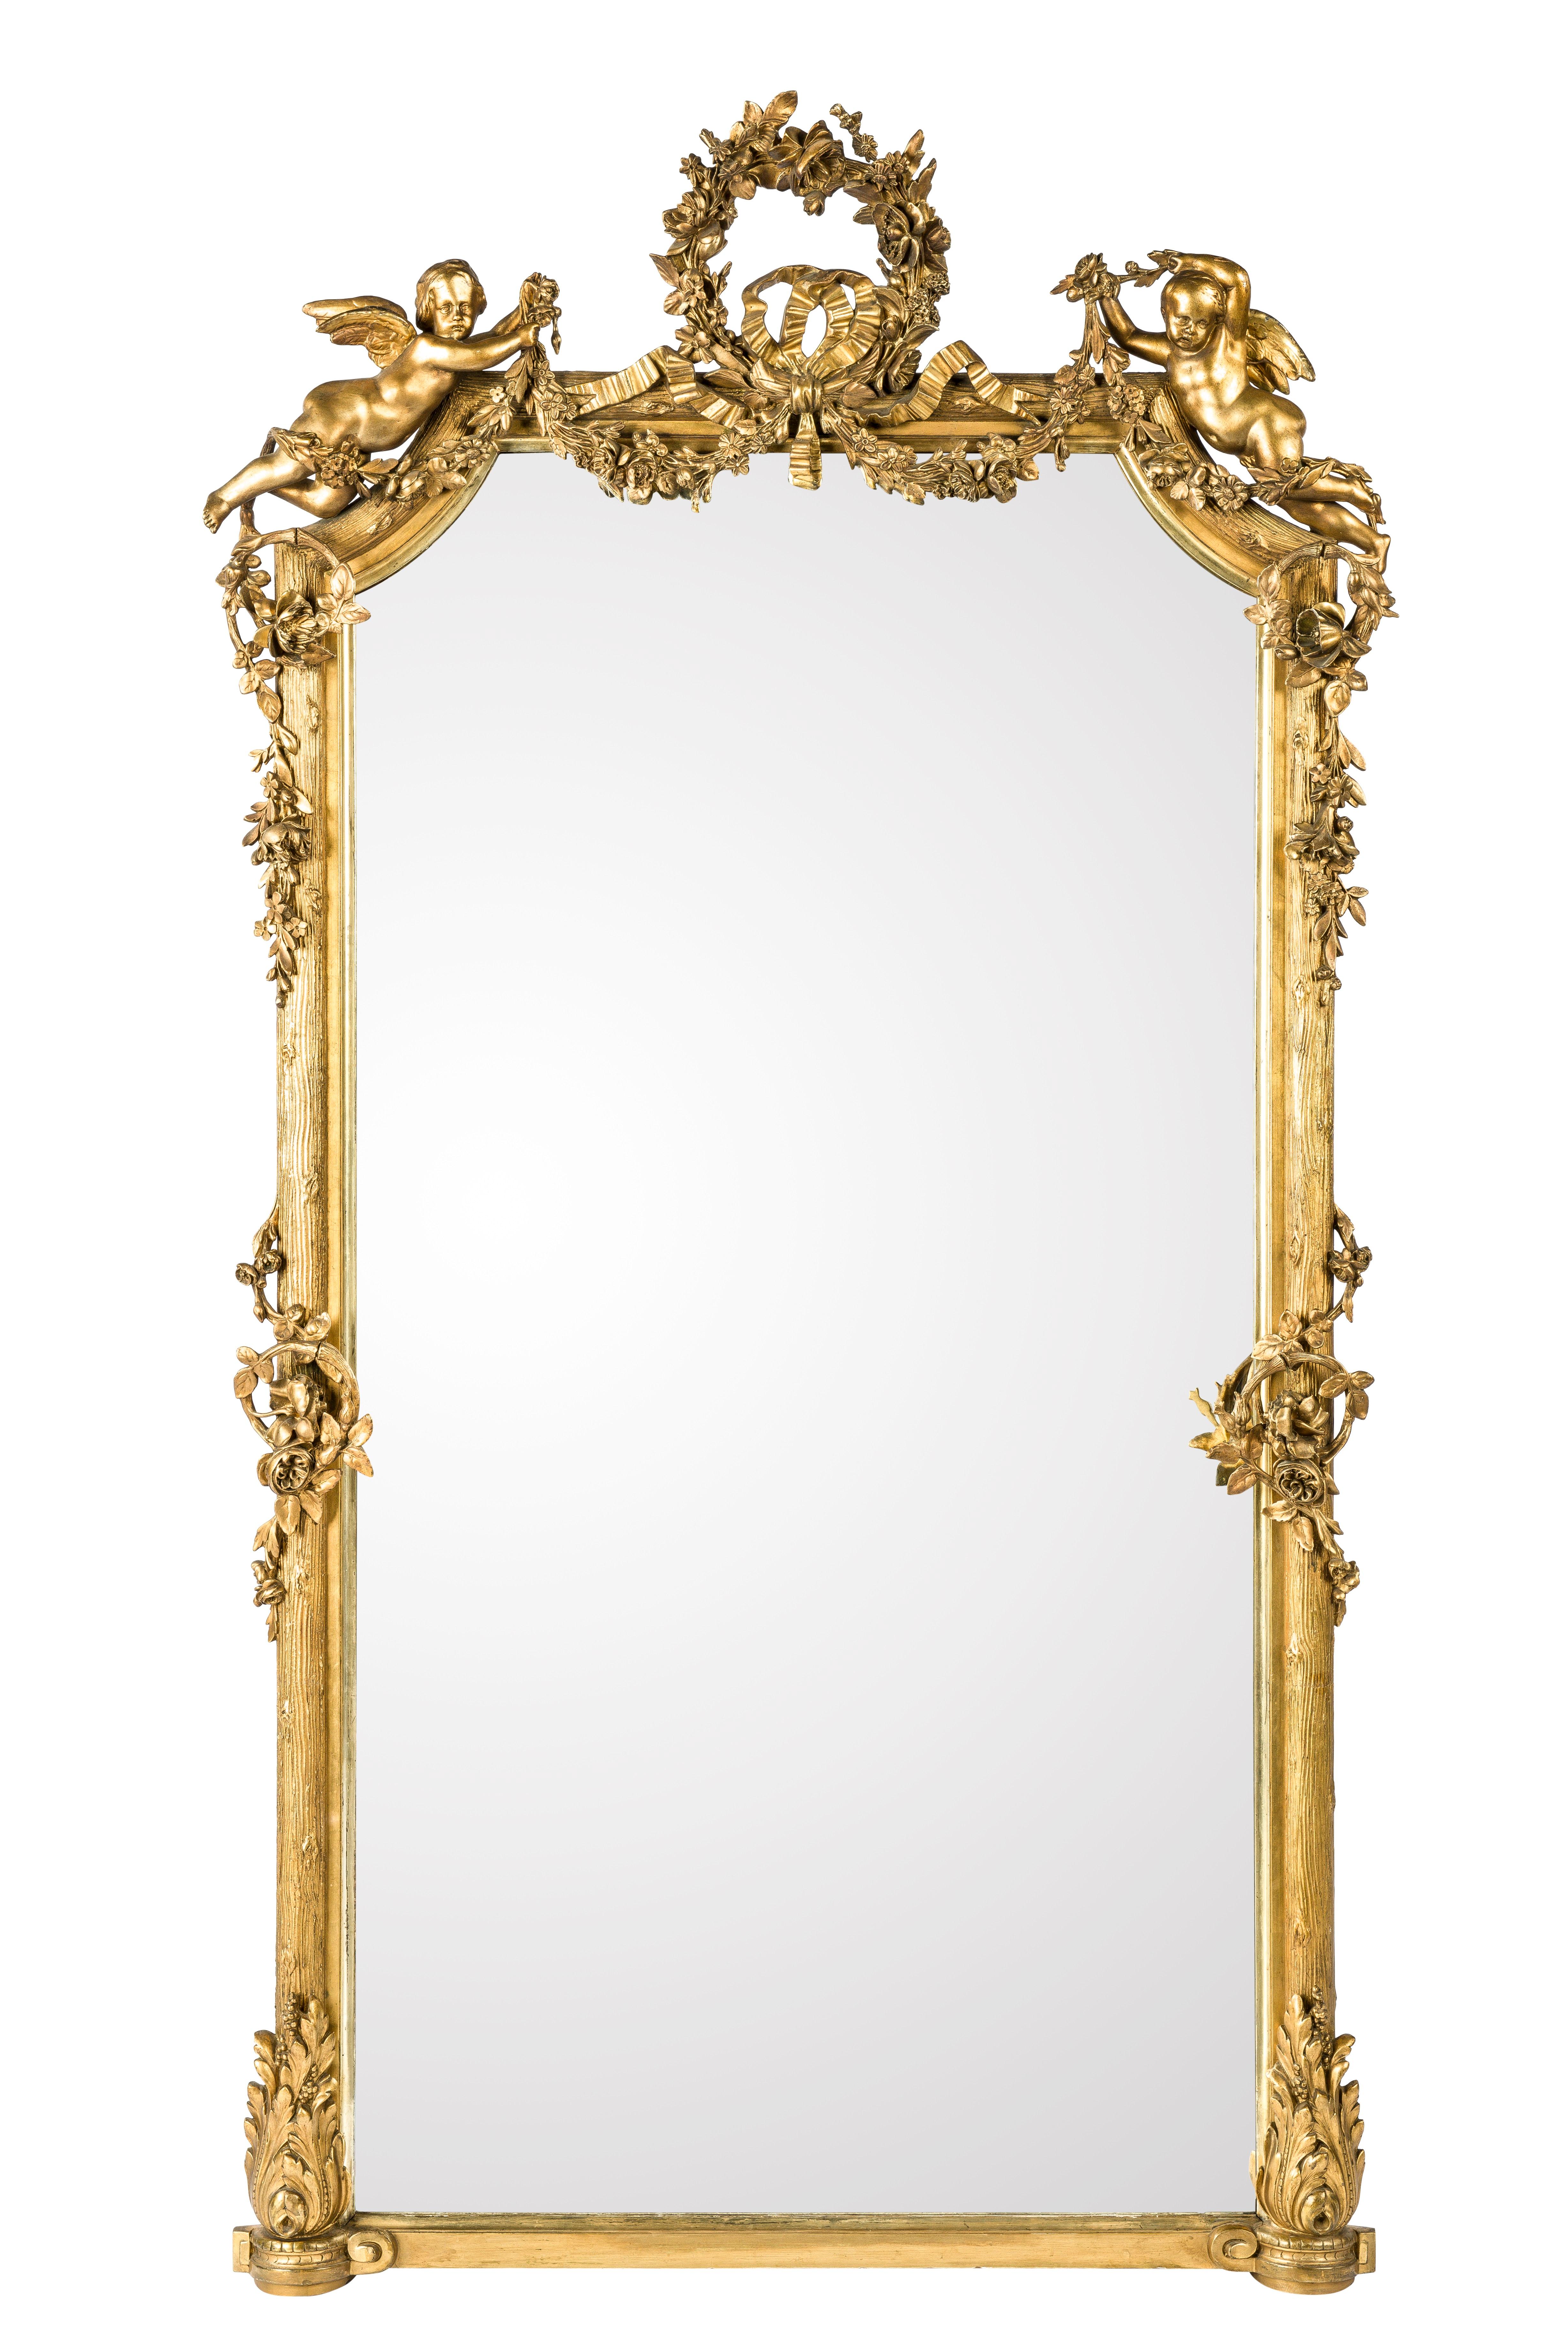 This astonishing pair of antique French mirrors is made in southern France around 1870. They are well preserved and very much authentic. The glass has a facet edge and is the original plate in both mirrors. 
The most elevated part of the frame is